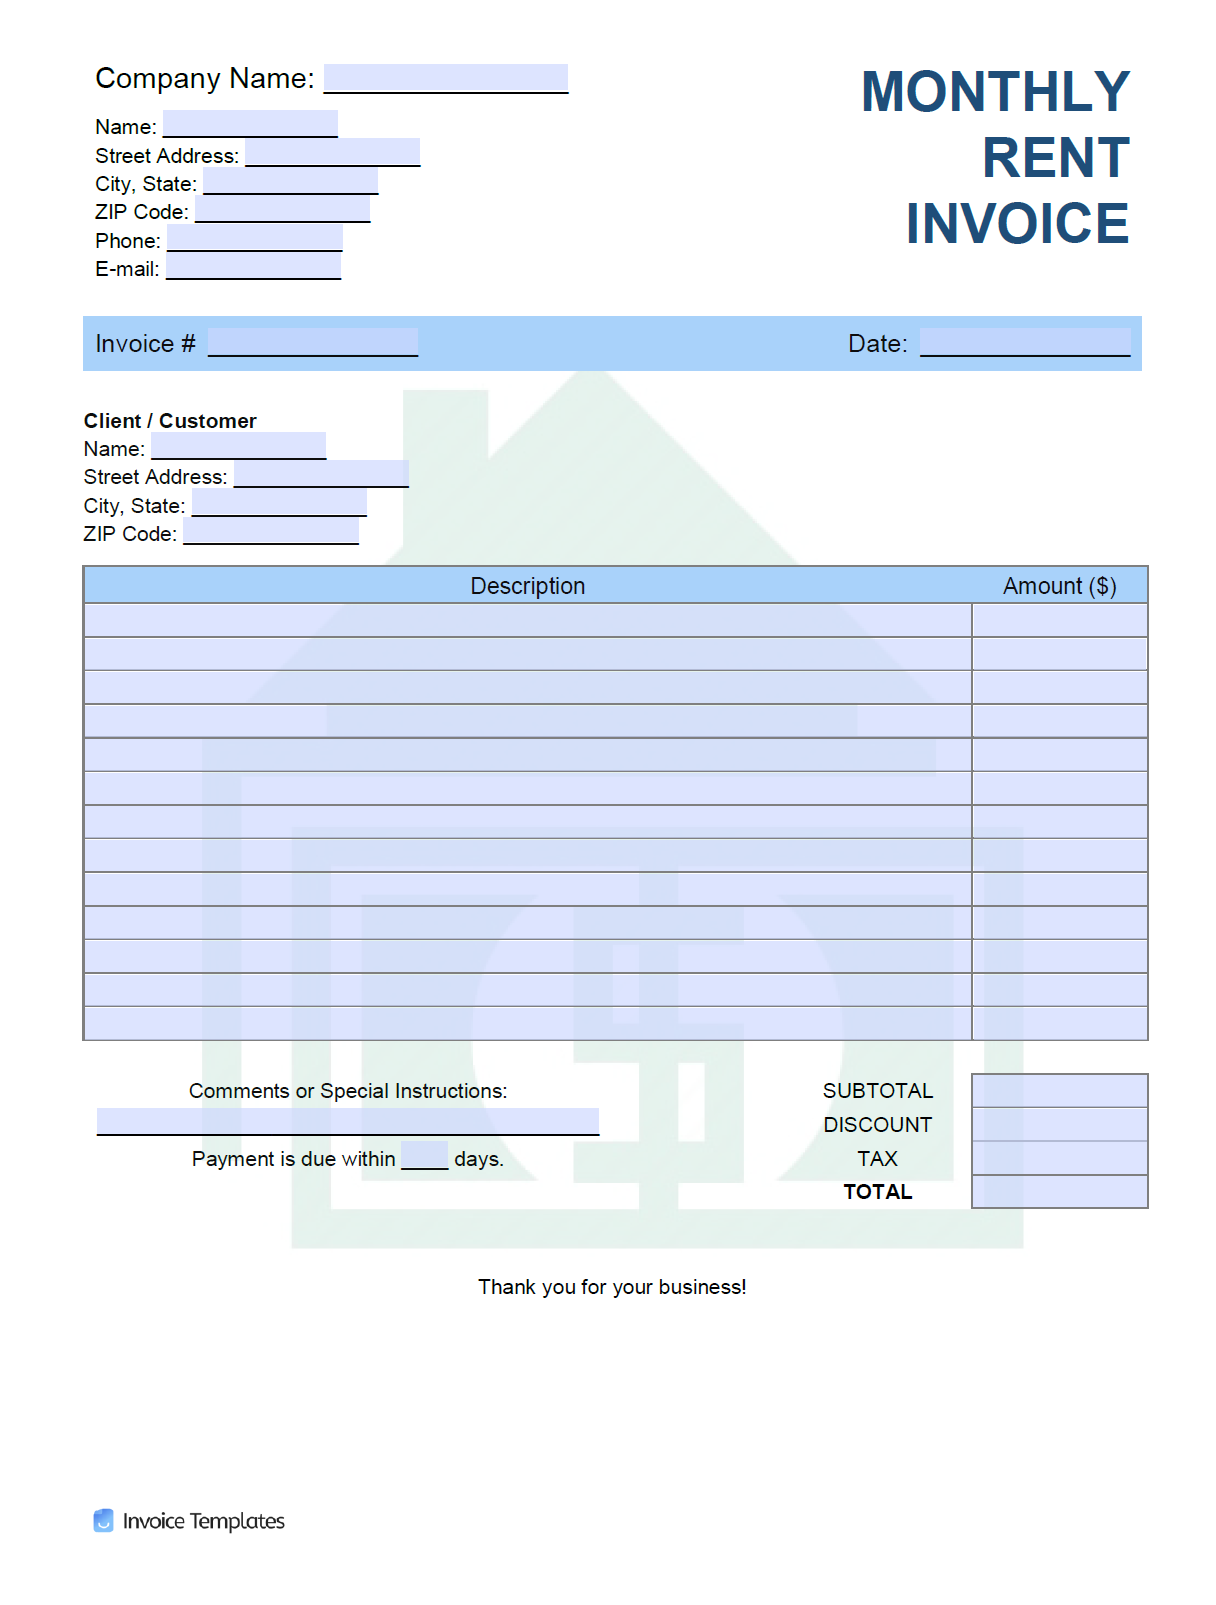 Free Monthly Rent (Landlord) Invoice Template  PDF  WORD  EXCEL For Invoice Template For Rent